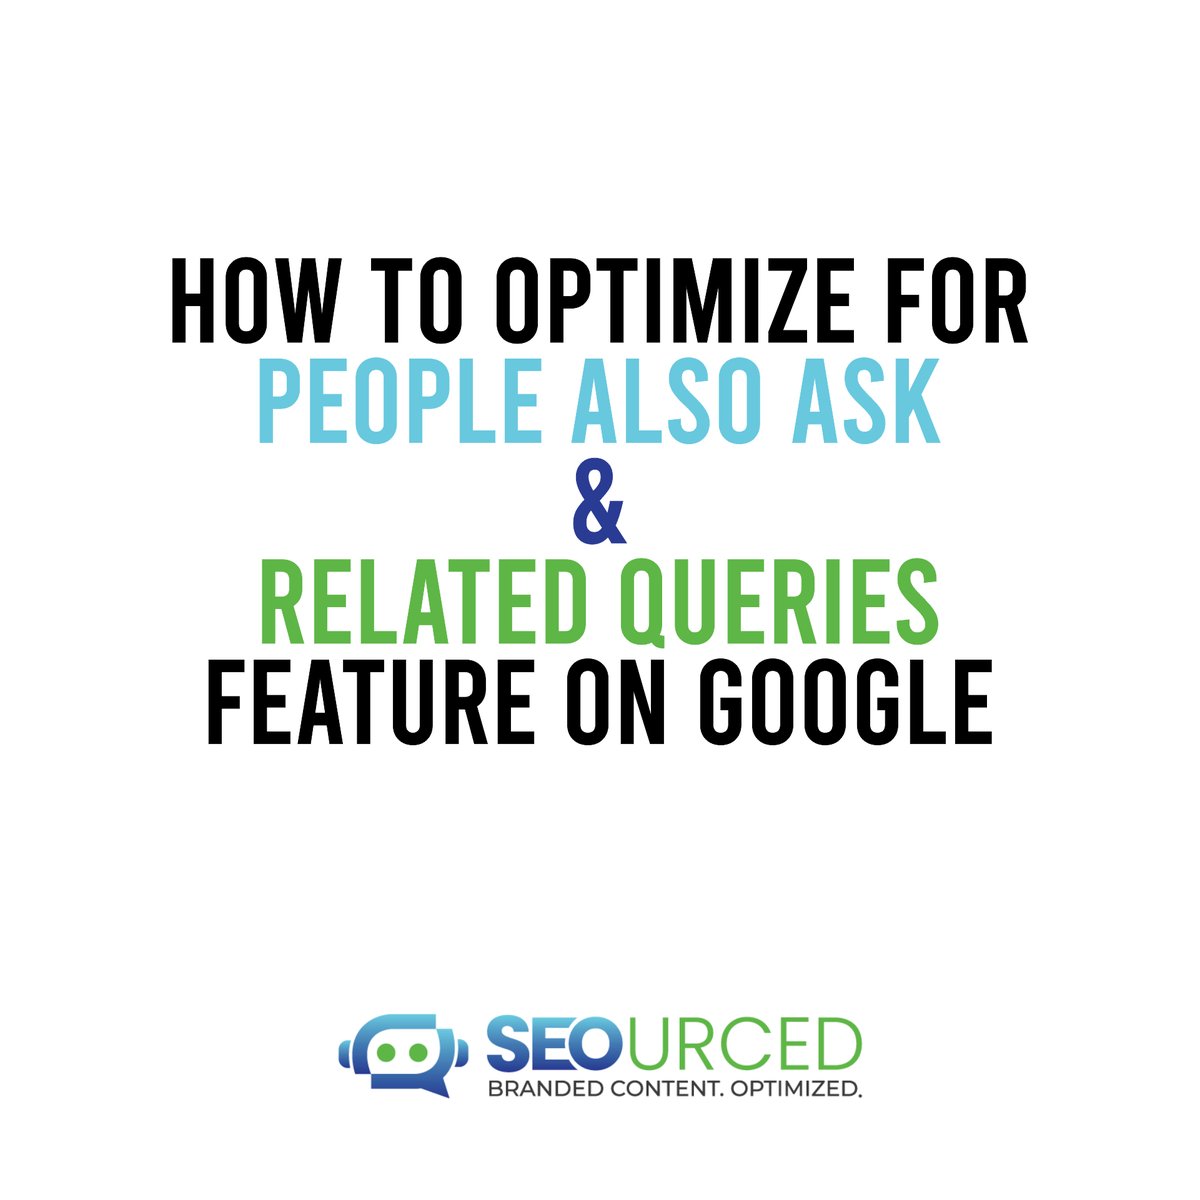 In this post, you'll learn how to optimize these features and improve your website's visibility in search engines.

#seotips #searchengineoptimization #contentoptimization #keywordresearch #structureddatamarkup #longtailkeywords #contentstructure #seostrategy #digitalmarketing